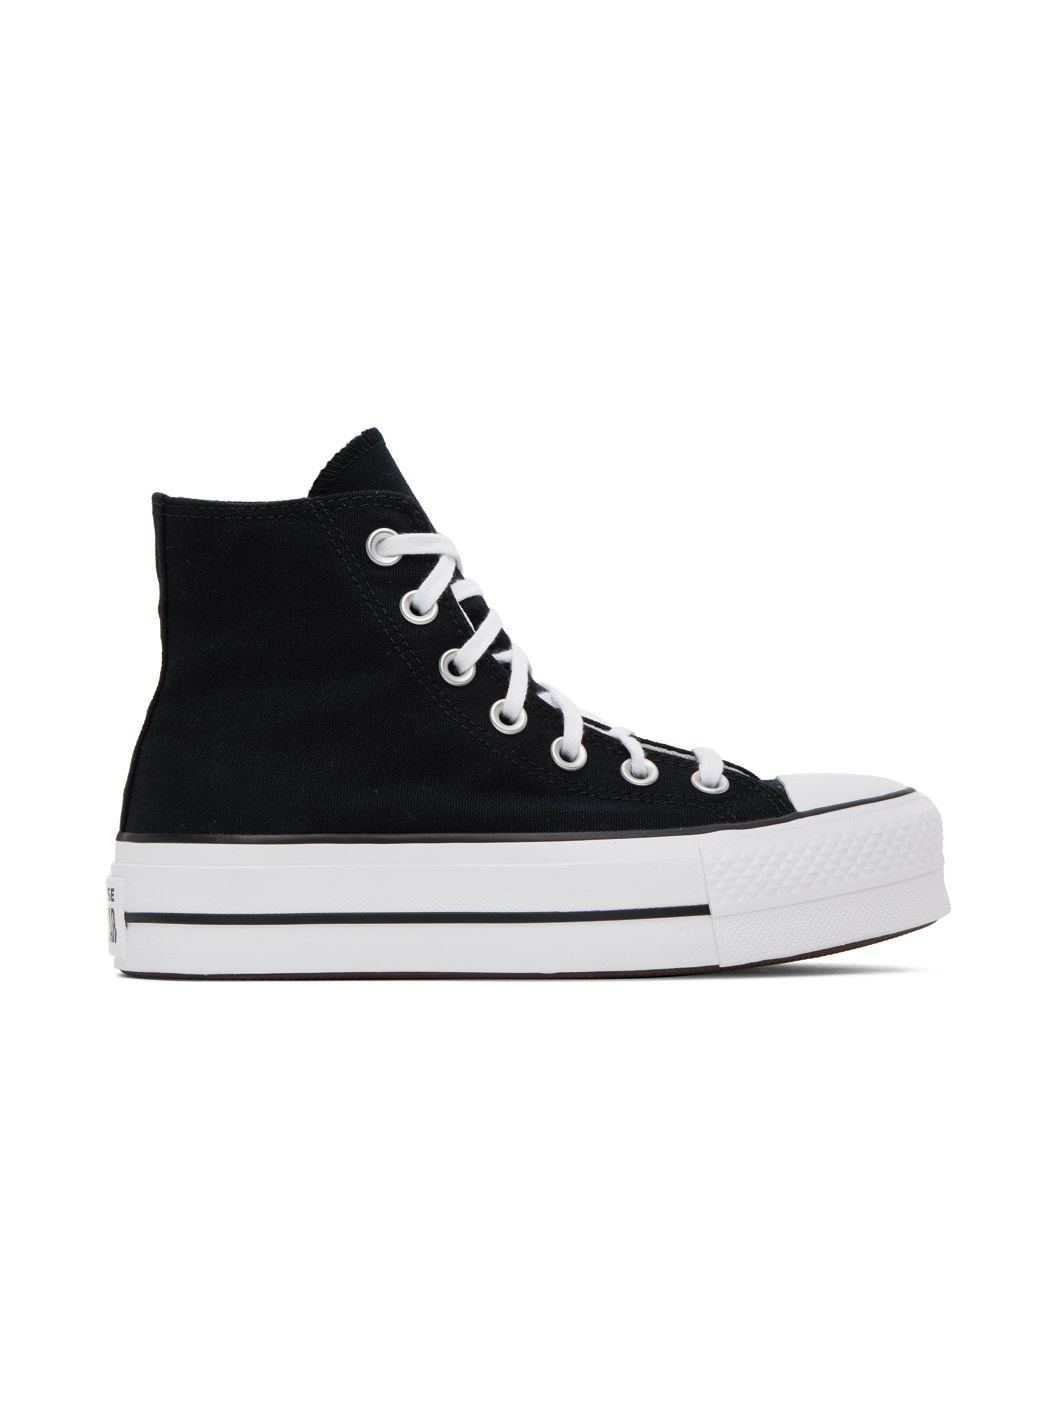 Black Chuck Taylor All Star Sneakers - 1